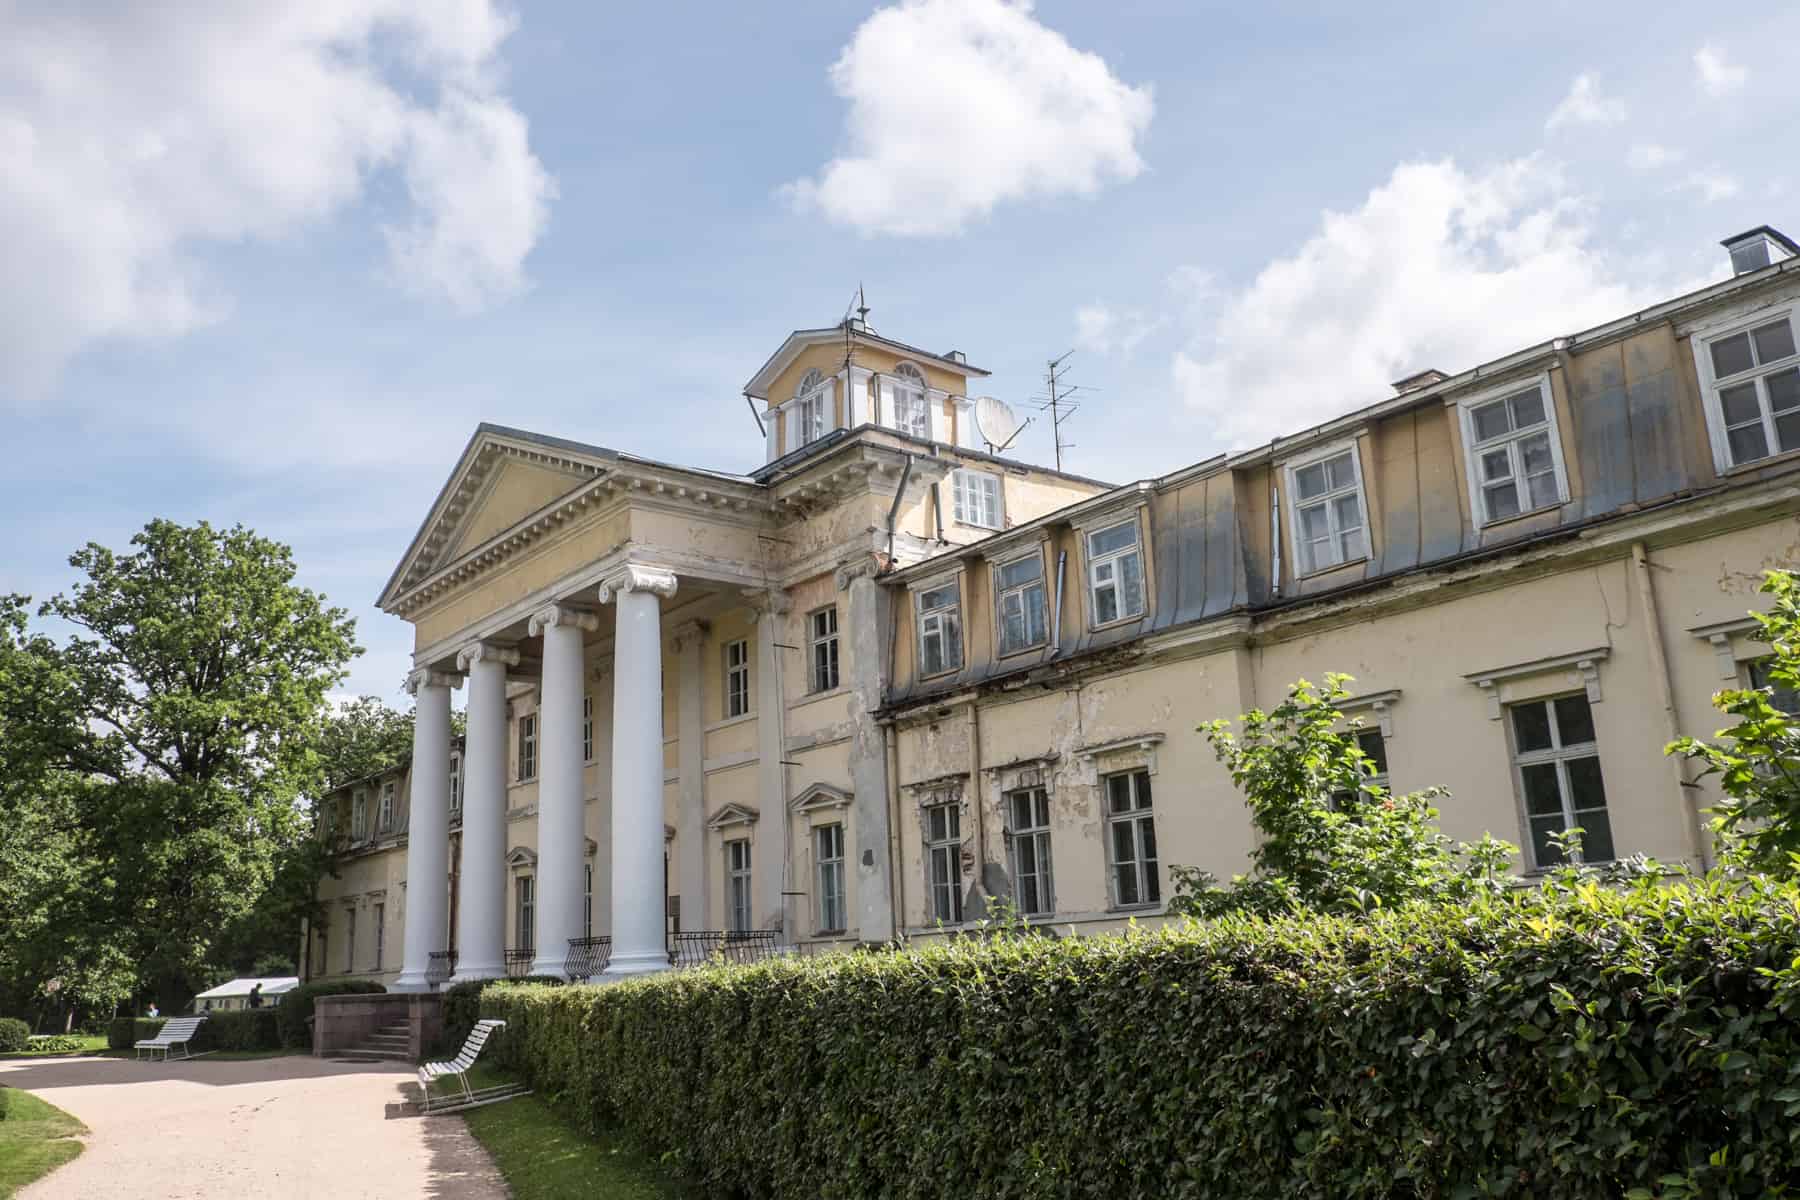 Krimulda Manor in Sigudla - a yellow neo-classical style building with white columns at the entrance, surrounded by manicured green hedges